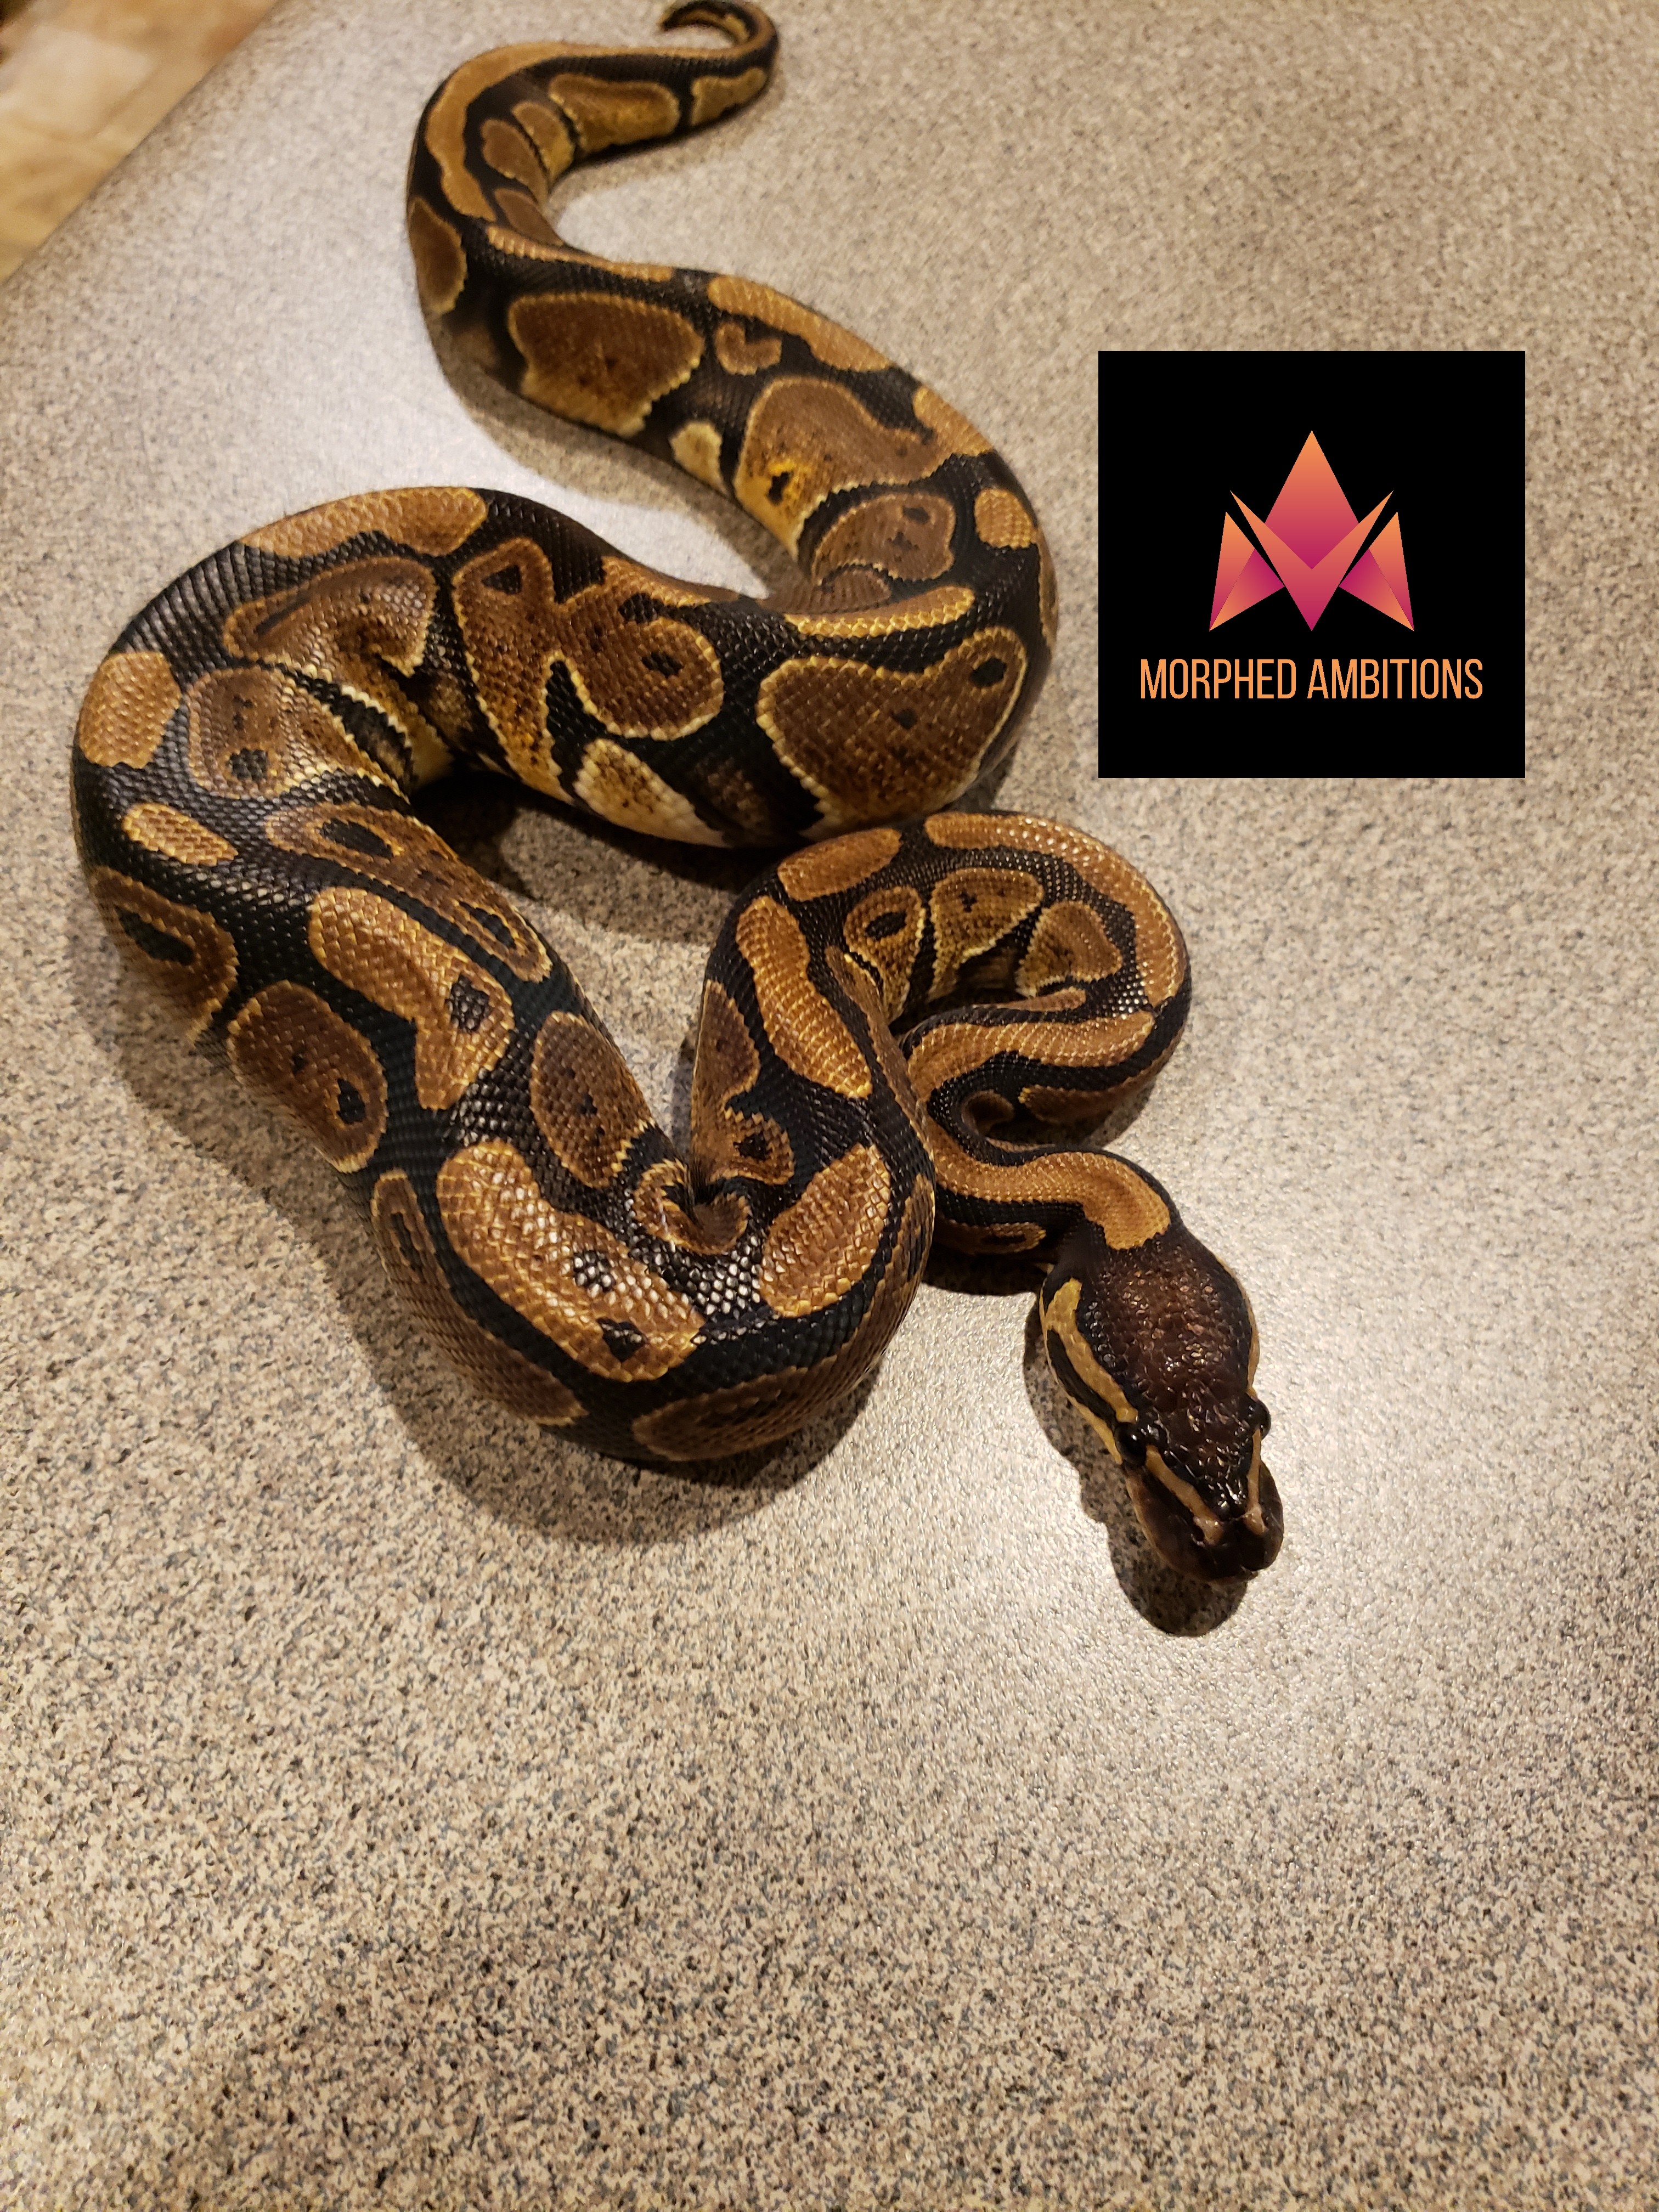 Nr Mandarin Ball Python by Morphed Ambitions